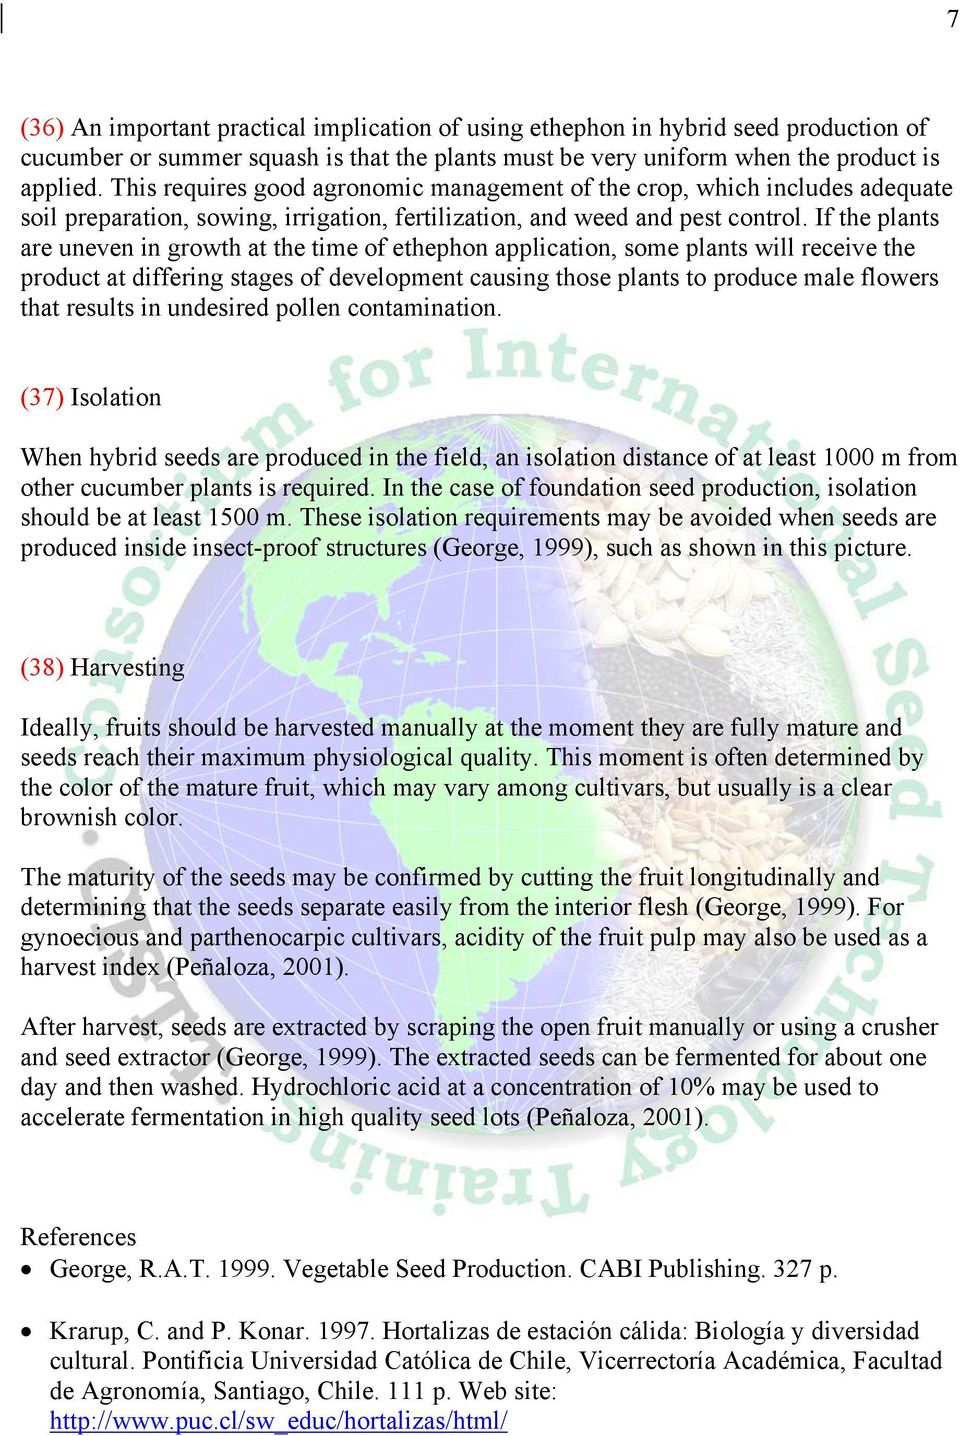 If the plants are uneven in growth at the time of ethephon application, some plants will receive the product at differing stages of development causing those plants to produce male flowers that